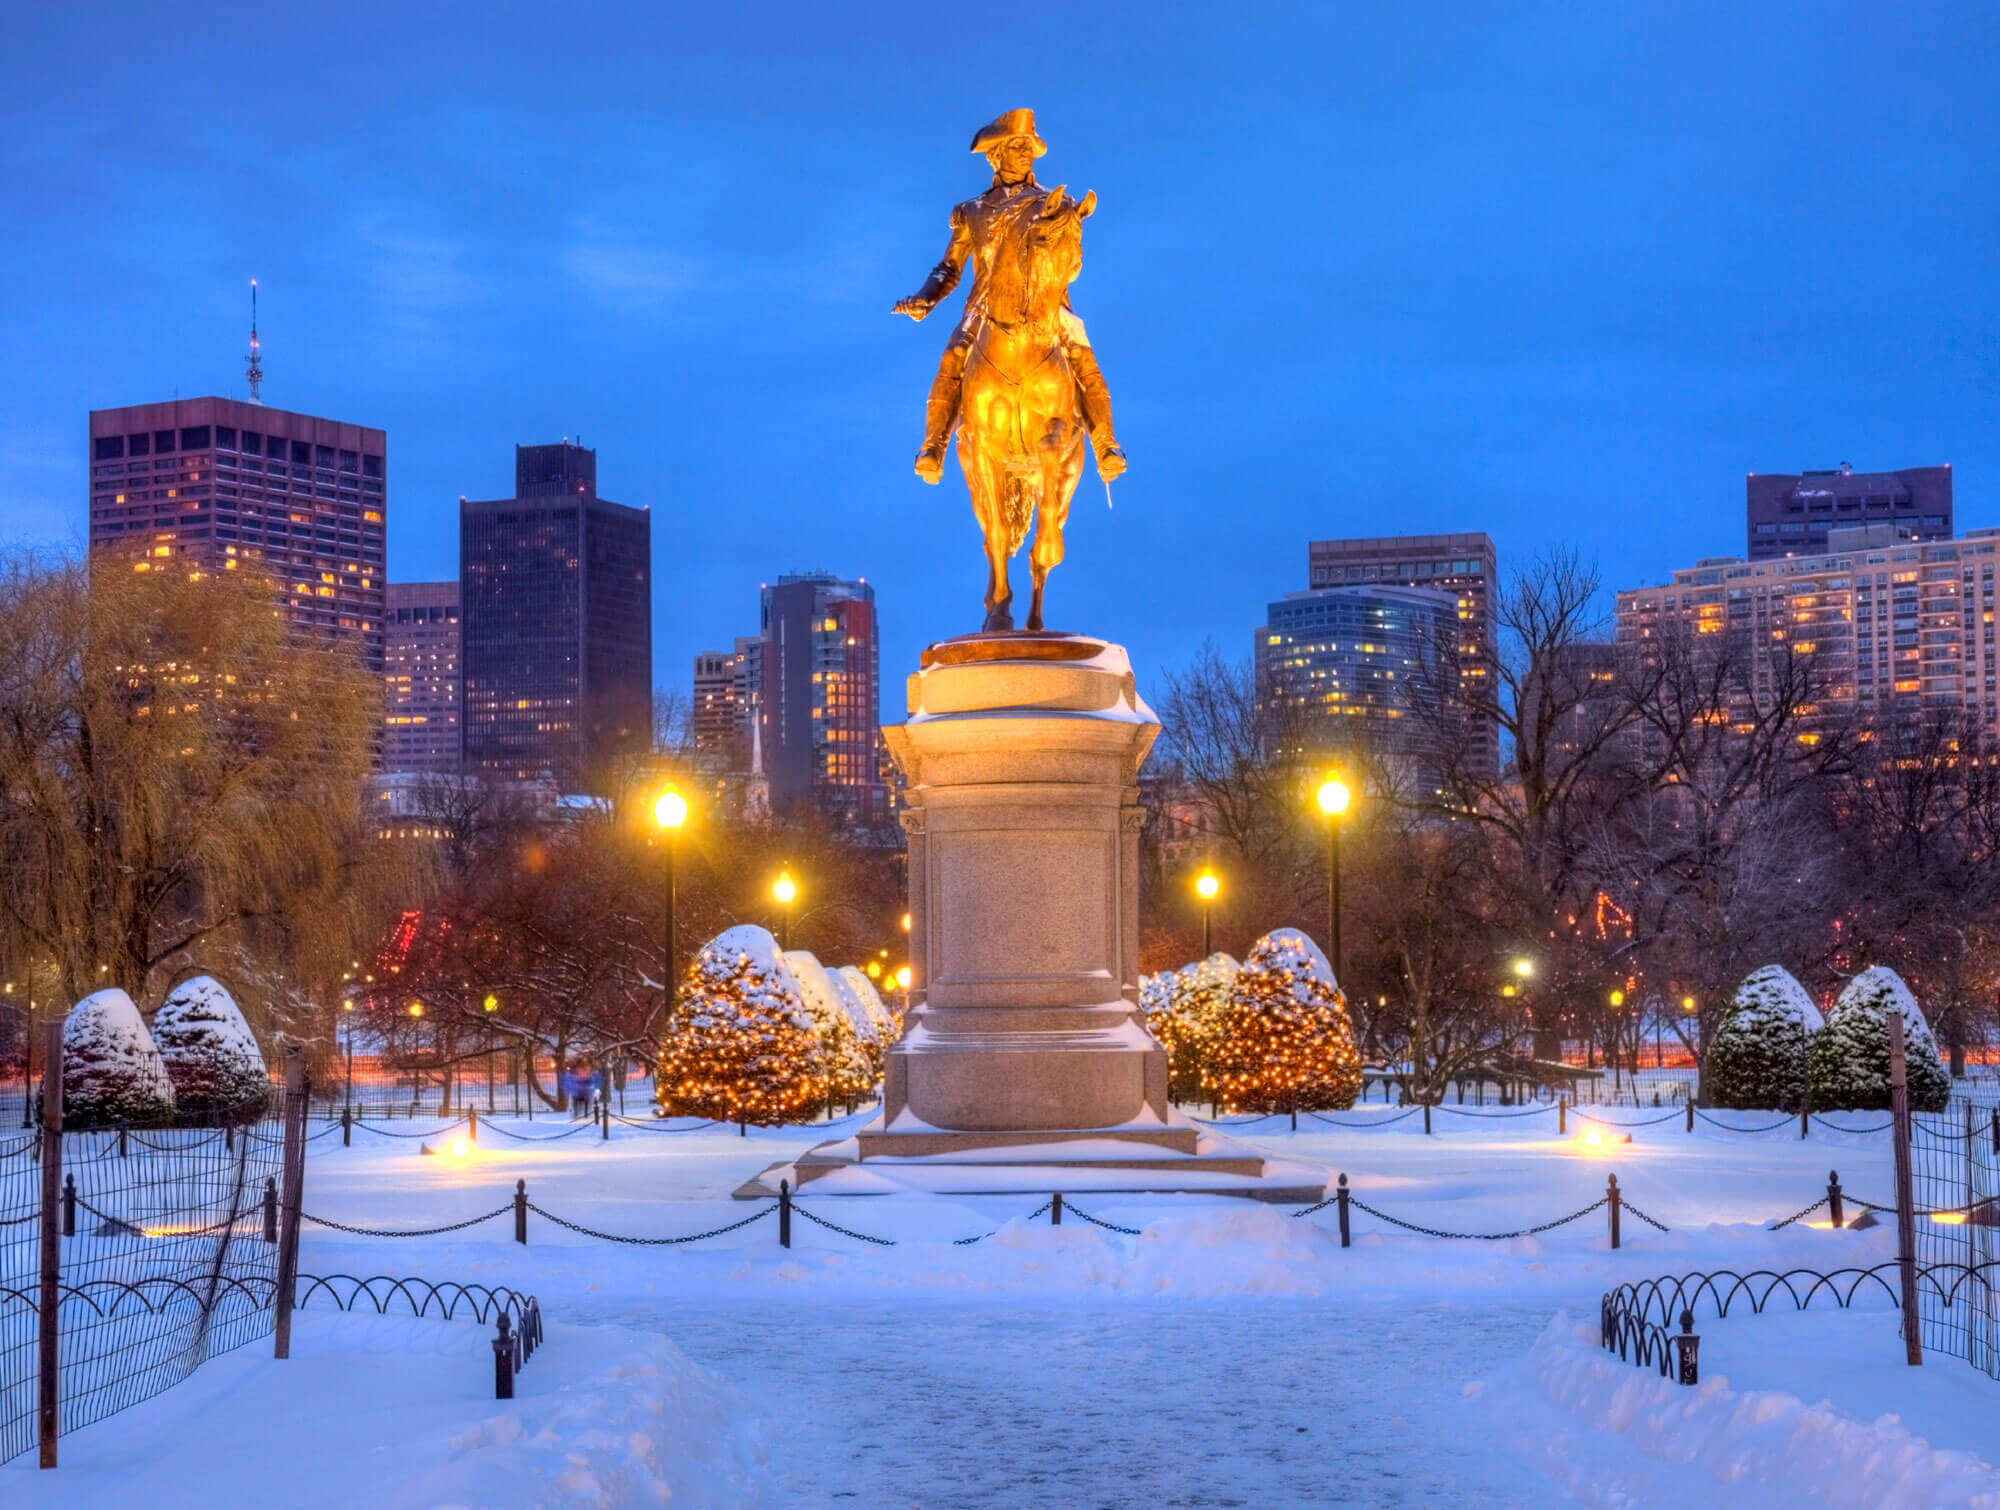 lit statue of George Washington on horseback surrounded by fallen snow in the Public Garden, Boston, MA